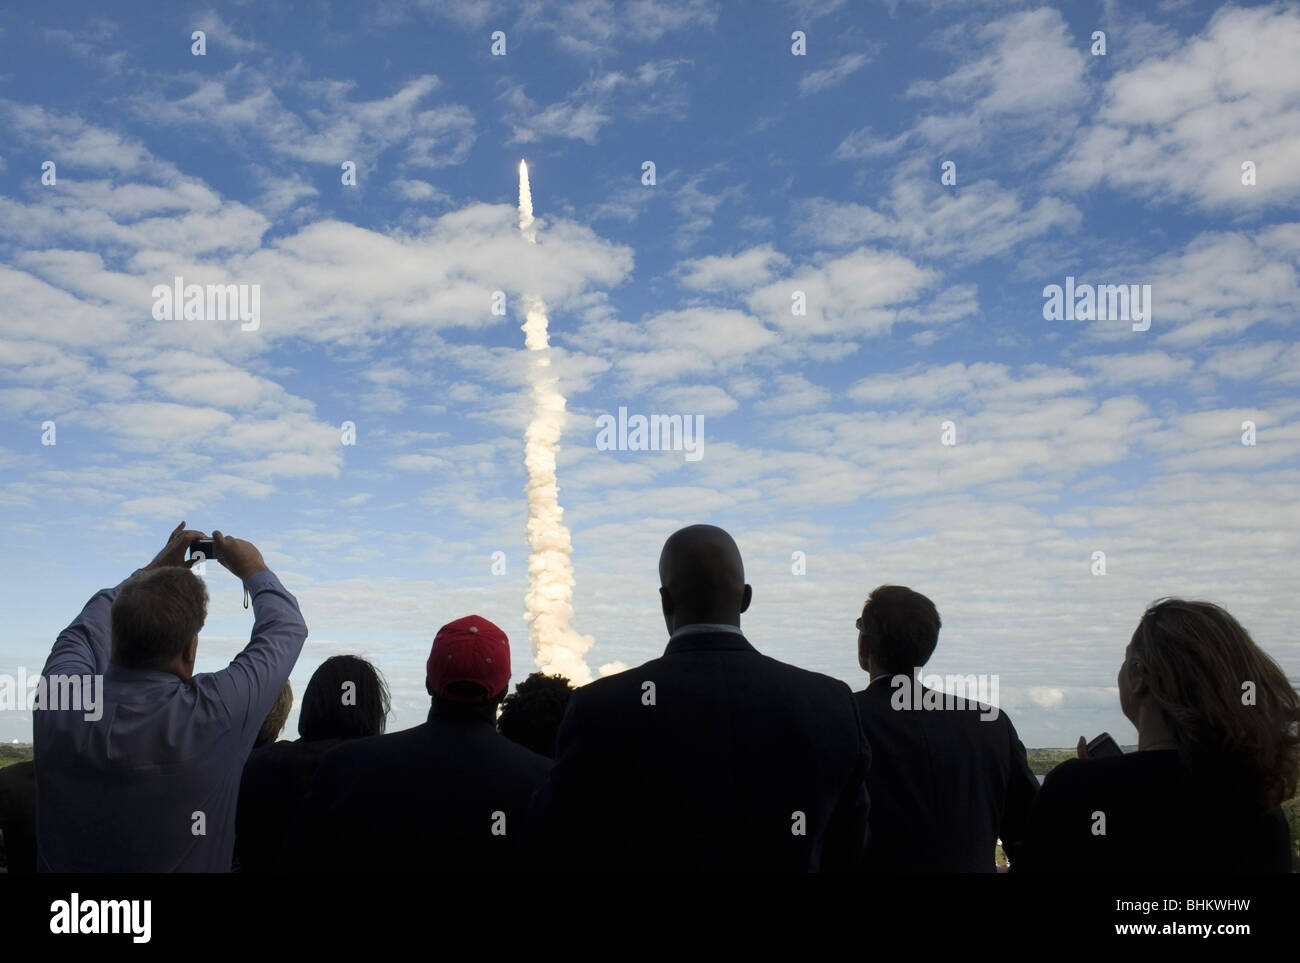 Guests at NASA's Kennedy Space Center view the launch of space shuttle Atlantis in Cape Canaveral, FL on Monday, Nov. 16, 2009 Stock Photo